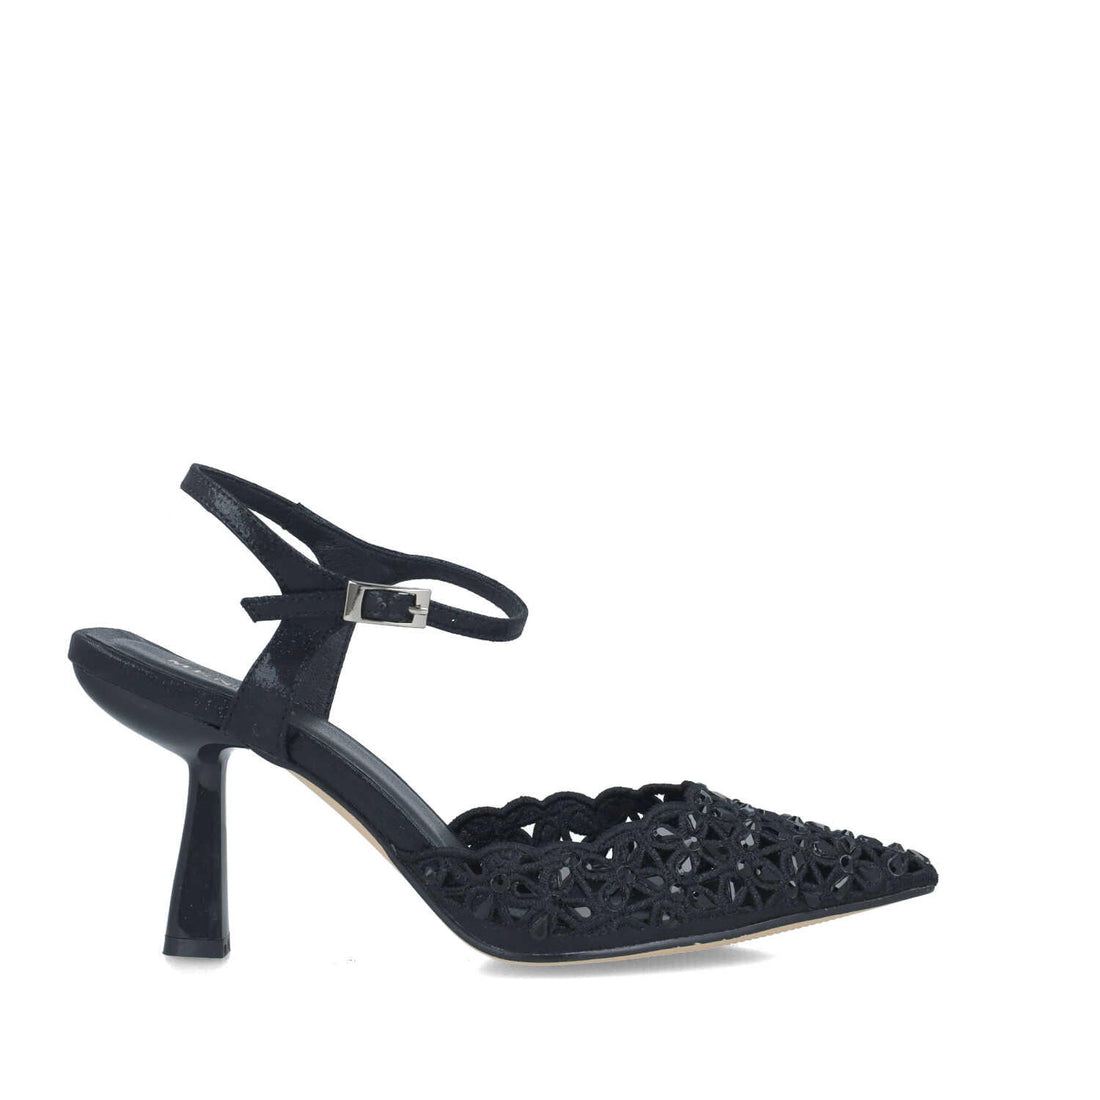 Black Pumps With Ankle Strap_24724_01_01